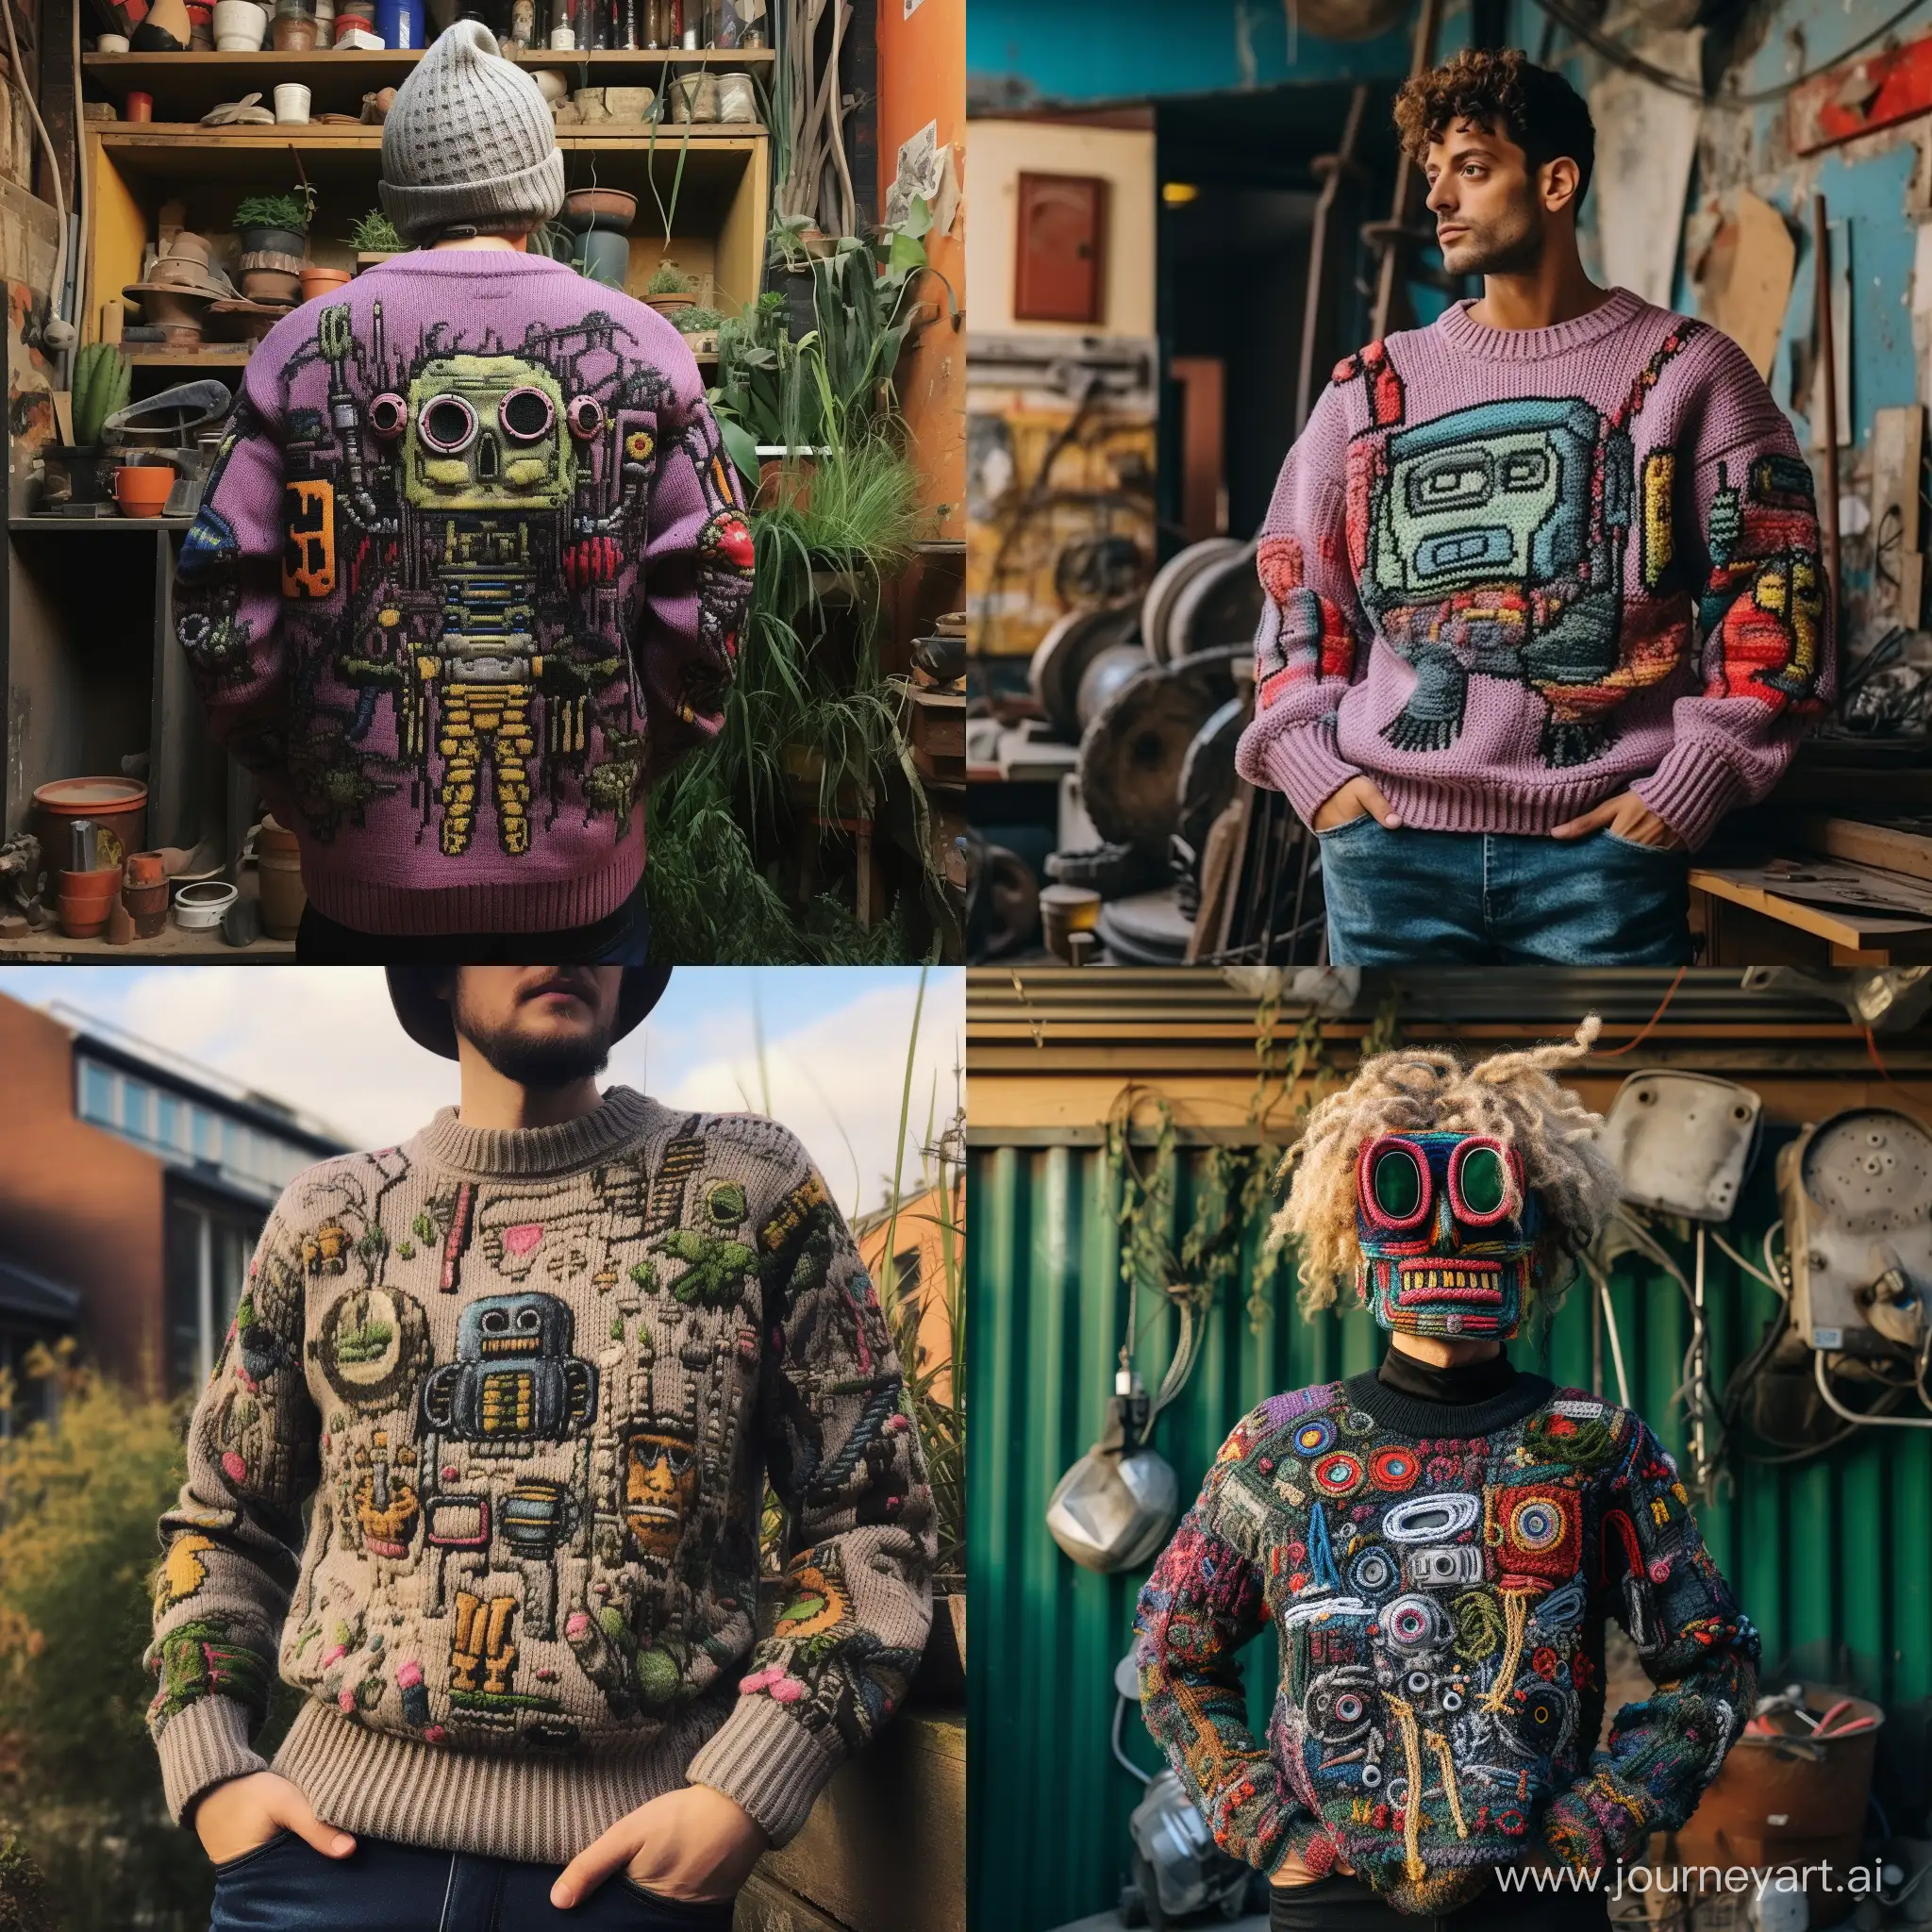 A photo of an oversize knitted sweater with a flat image on the sweater, on which robots, he conquered every person and plant, the image is knitted from threads, punk style of the 80s